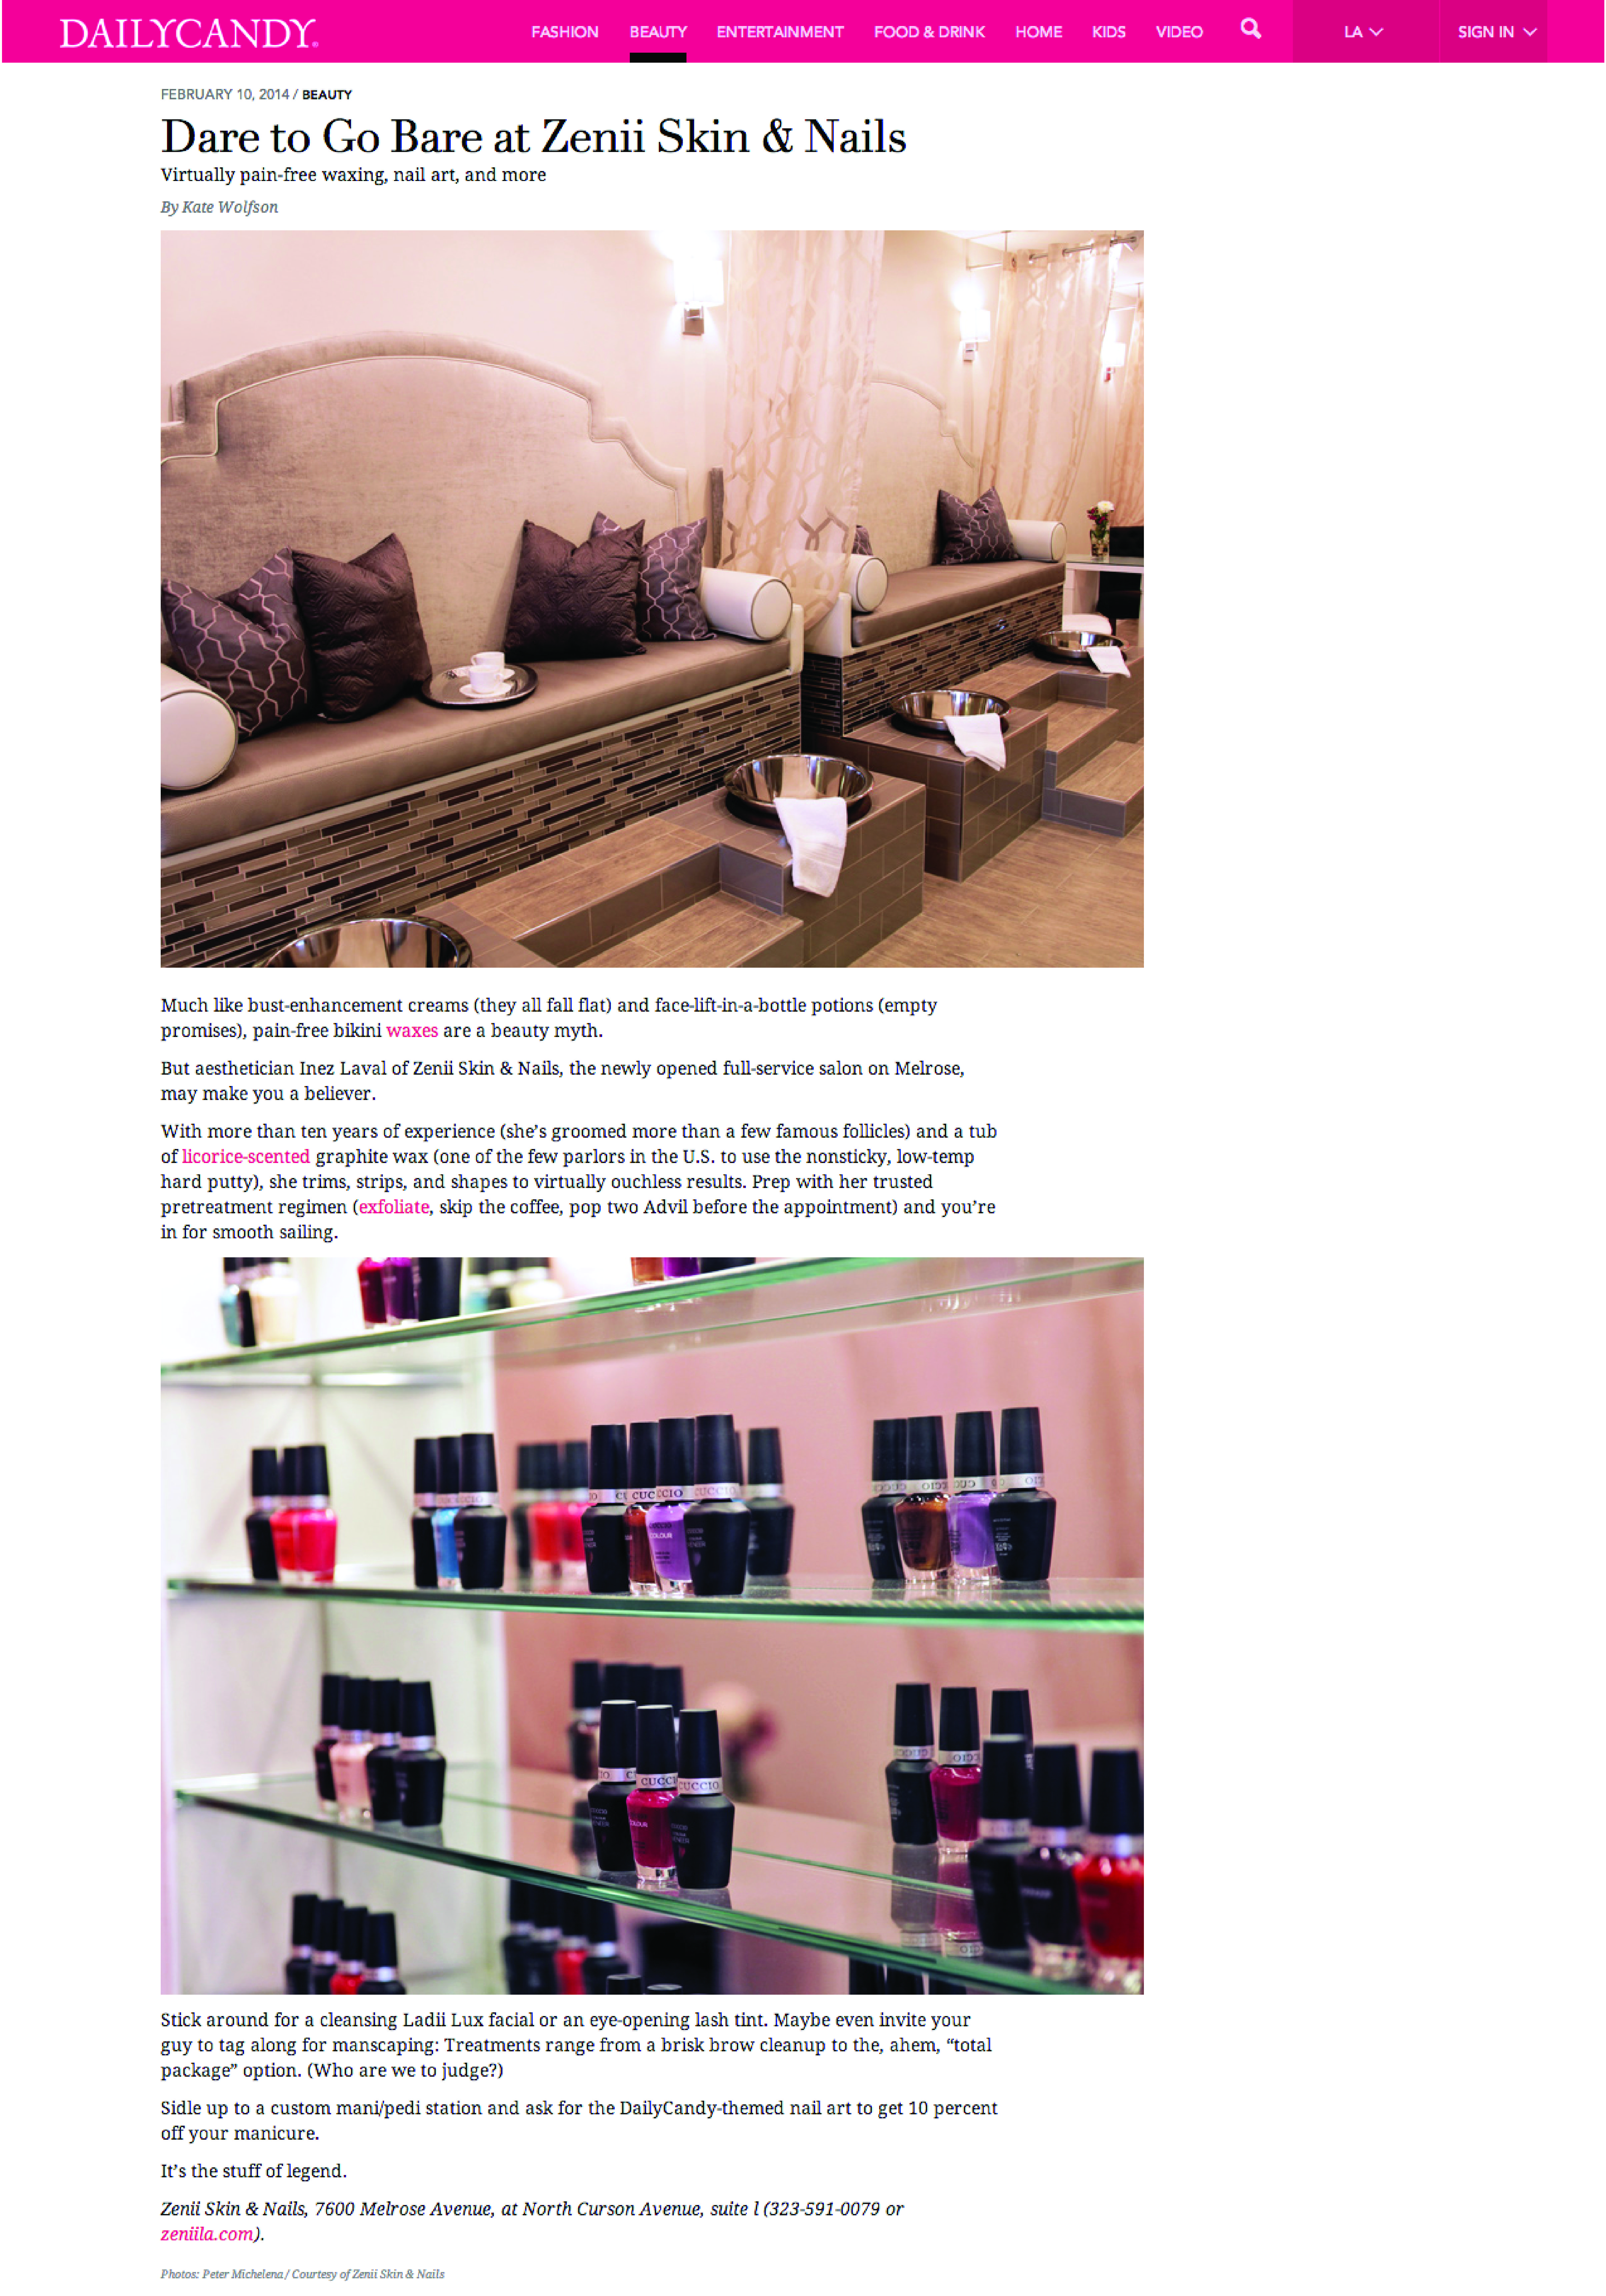 Dare to Go Bare at Zenii Skin & Nails for Daily Candy by Kate Wolfson